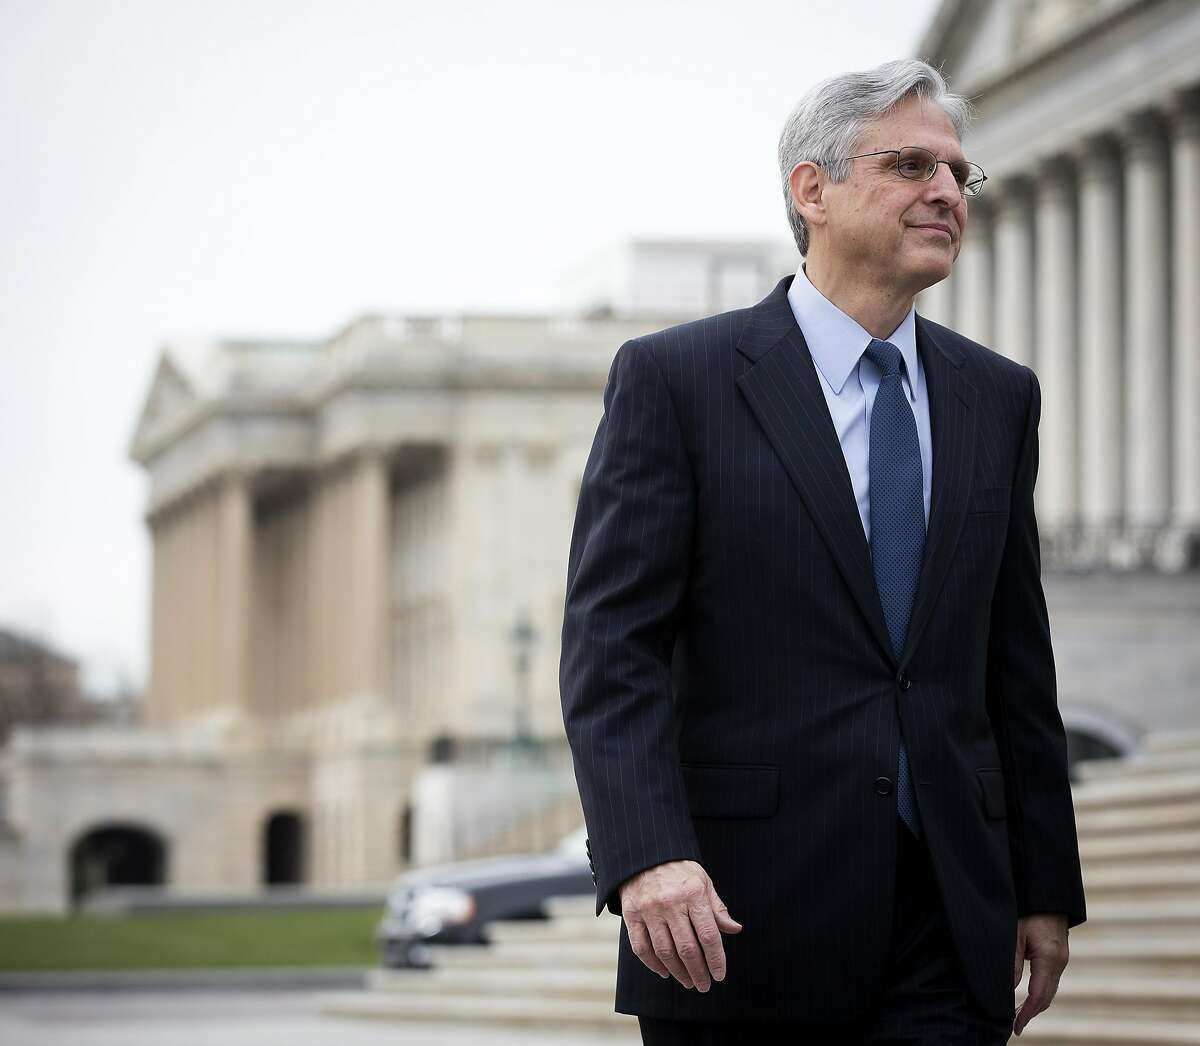 Judge Merrick Garland outside of the Capitol in Washington, March 22, 2016. Garland, President Barack Obama�s Supreme Court nominee, has deftly navigated Washington�s high-powered legal circles for decades. (Doug Mills/The New York Times)